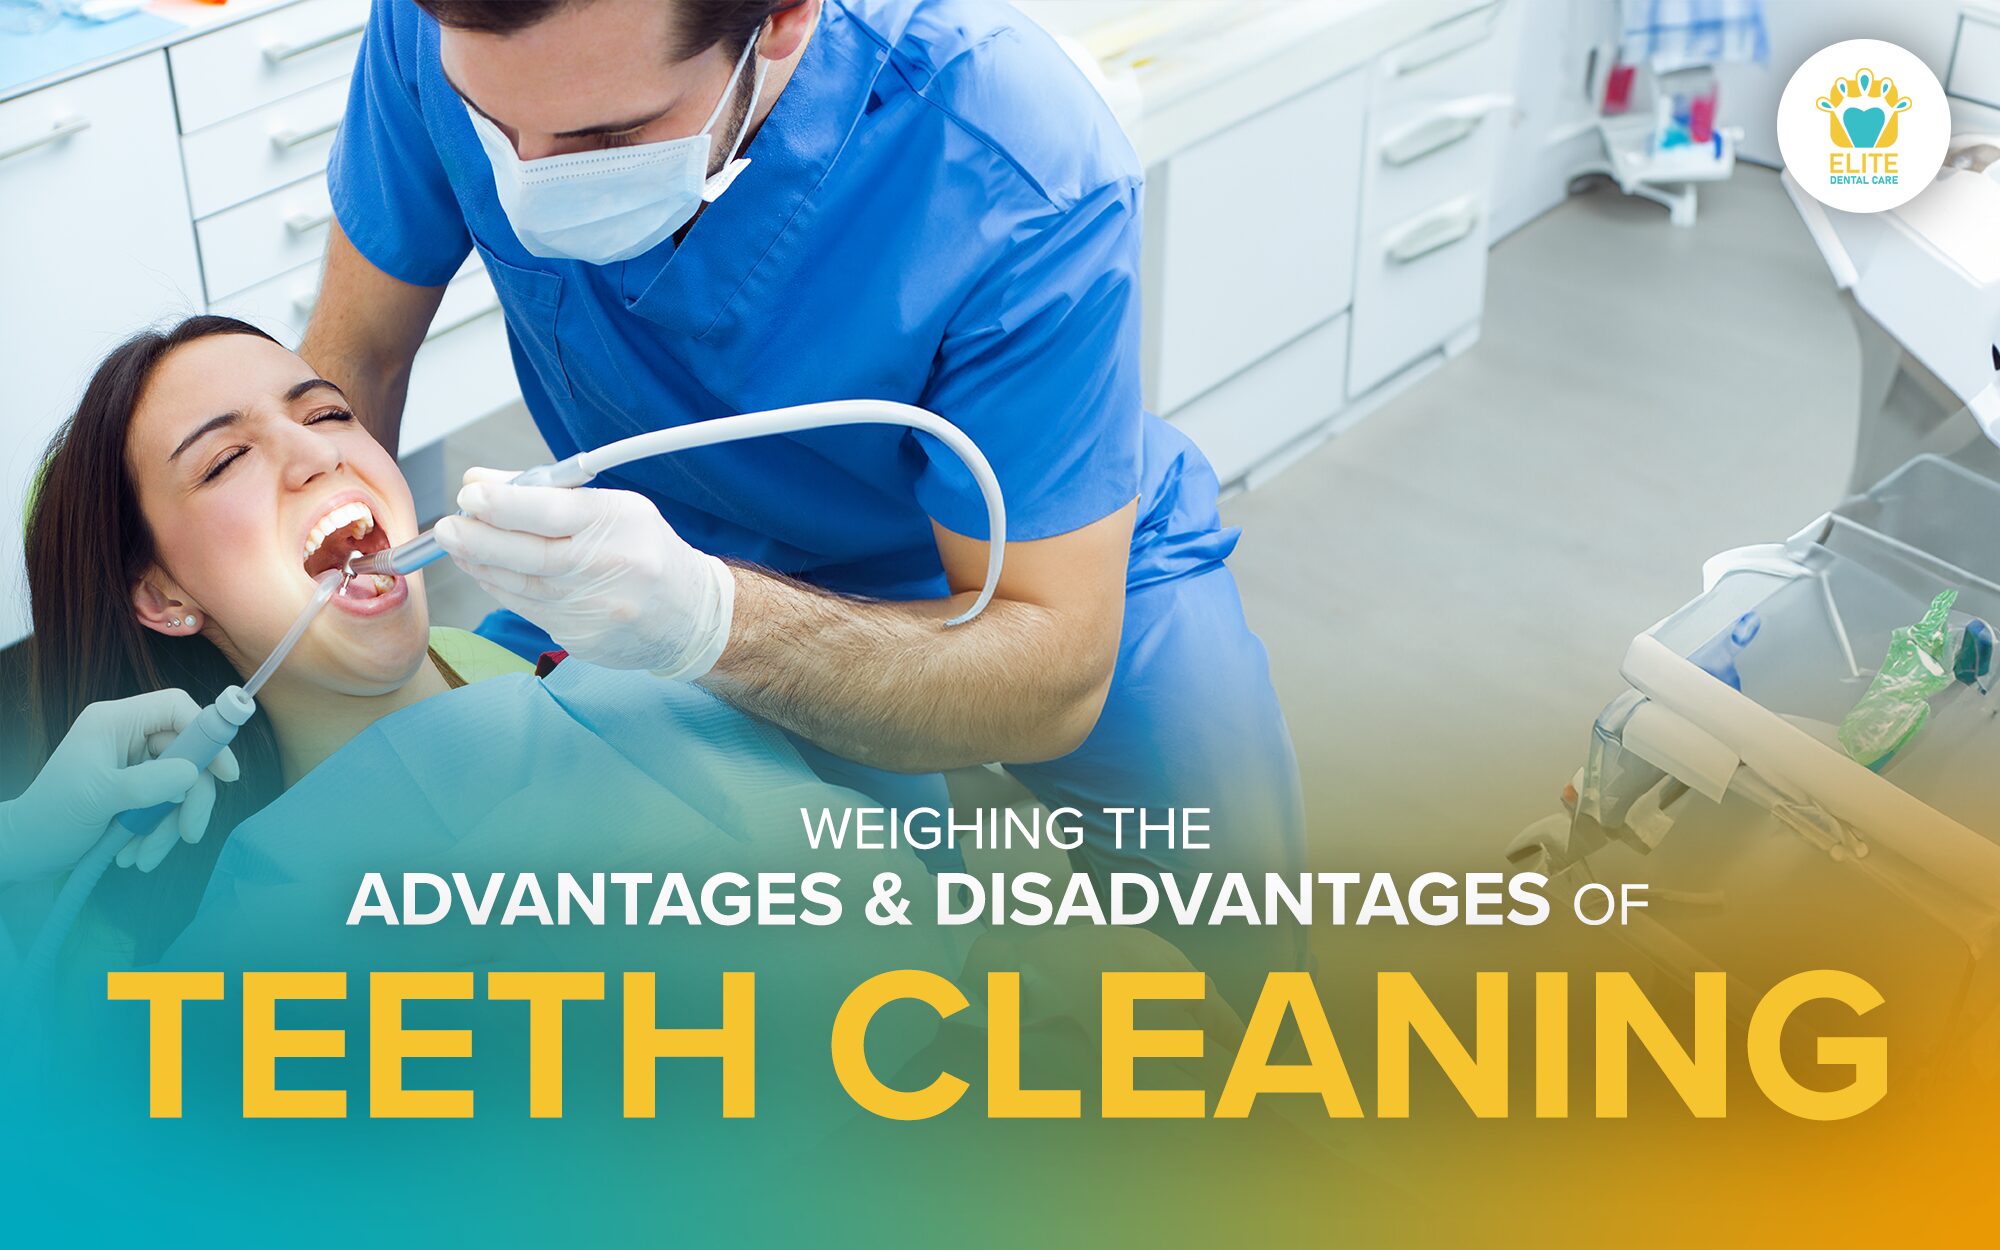 ADVANTAGES AND DISADVANTAGES OF TEETH CLEANING